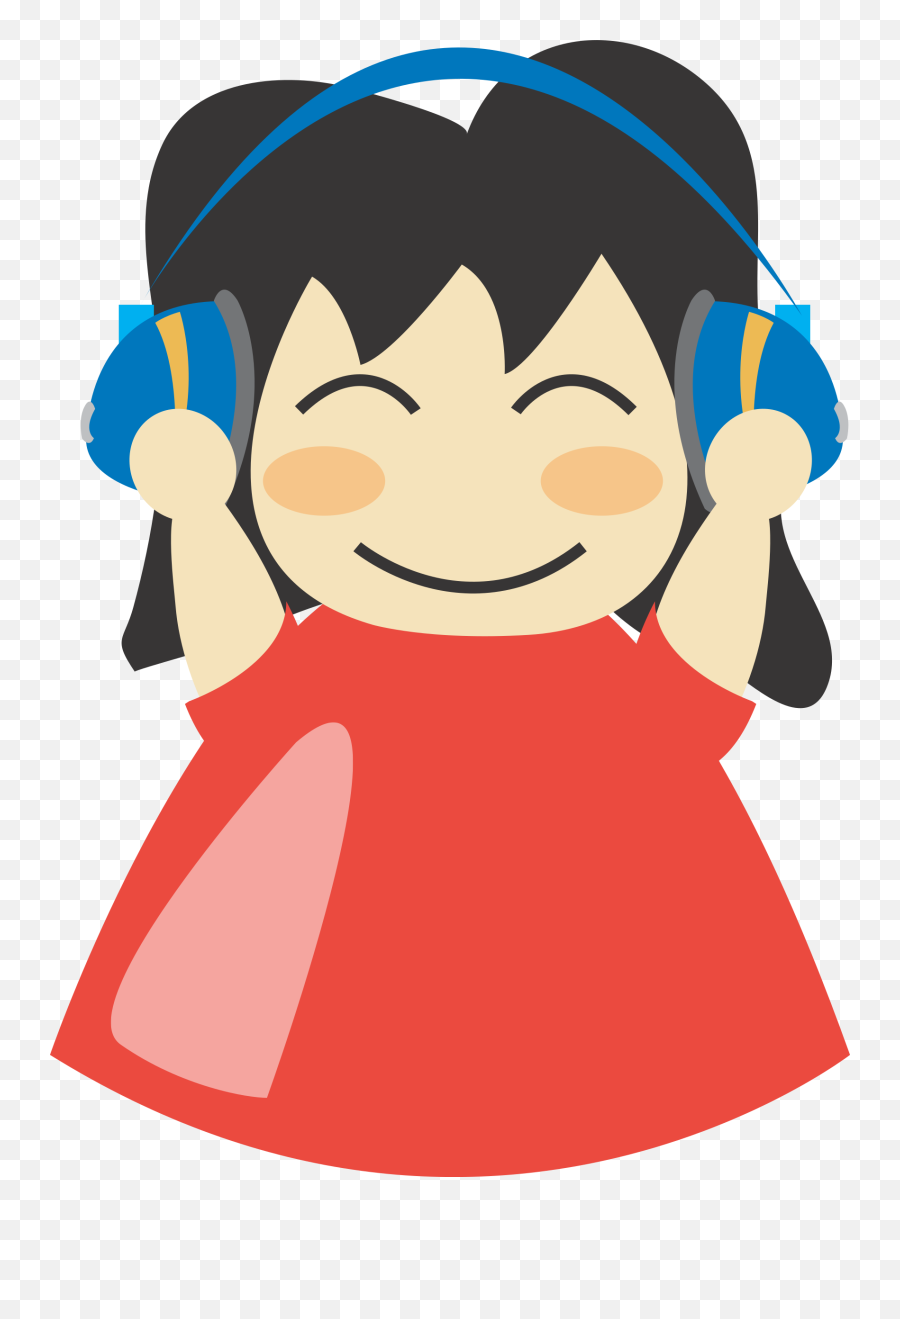 Girl With Headphones Clip Art At Clker - Listening To Music Clipart Transparent Emoji,Headphones Clipart